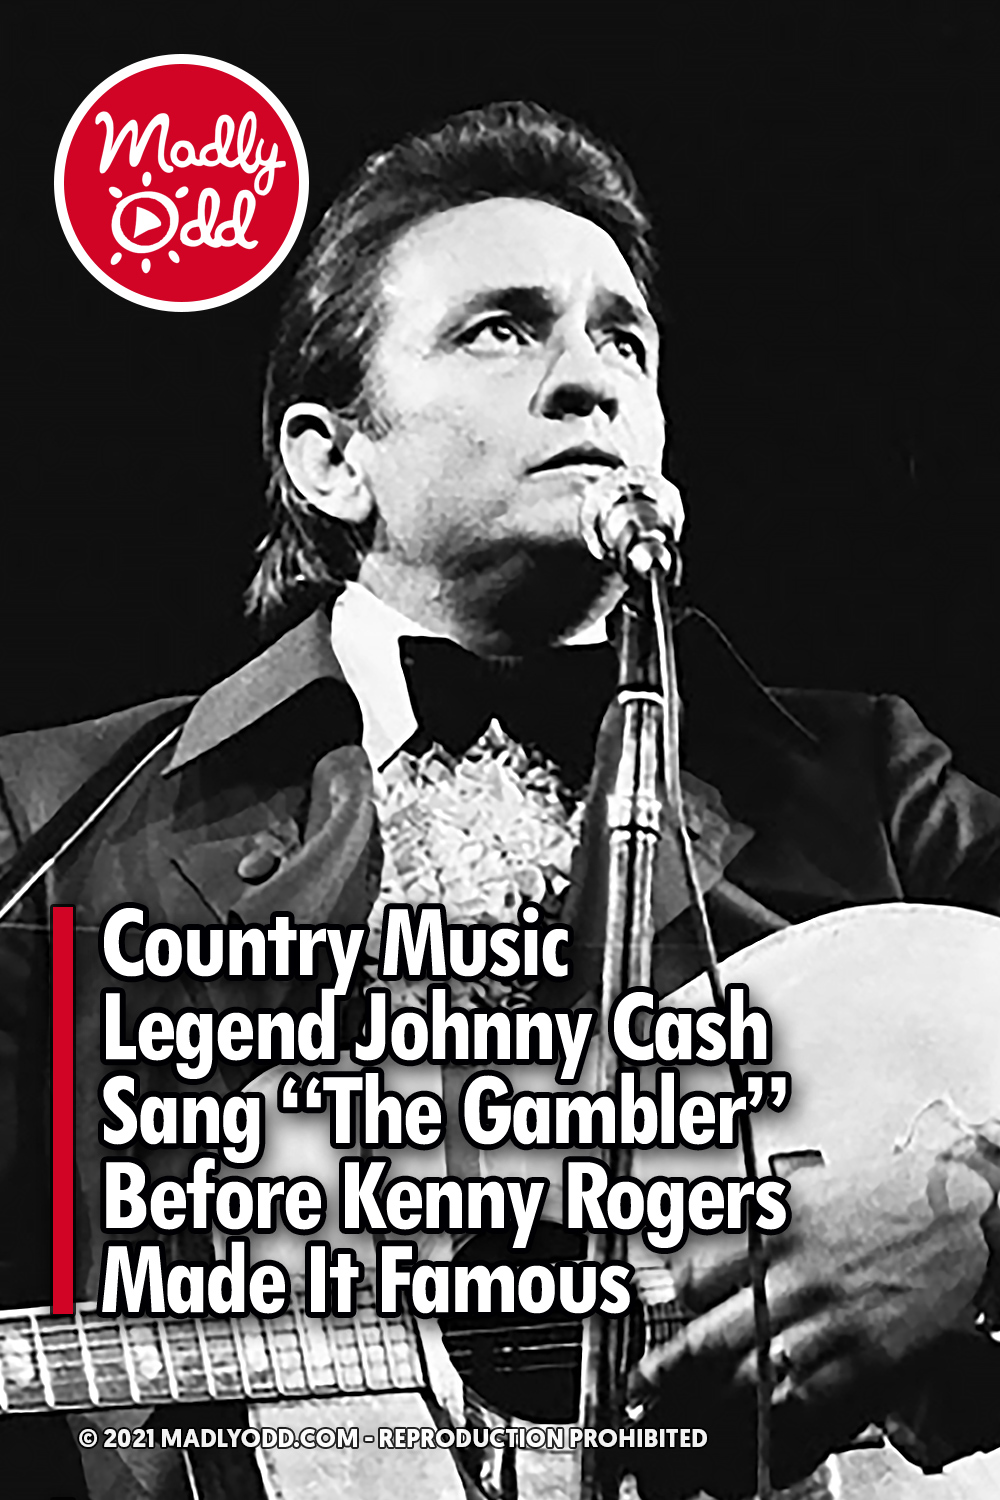 Country Music Legend Johnny Cash Sang “The Gambler” Before Kenny Rogers Made It Famous